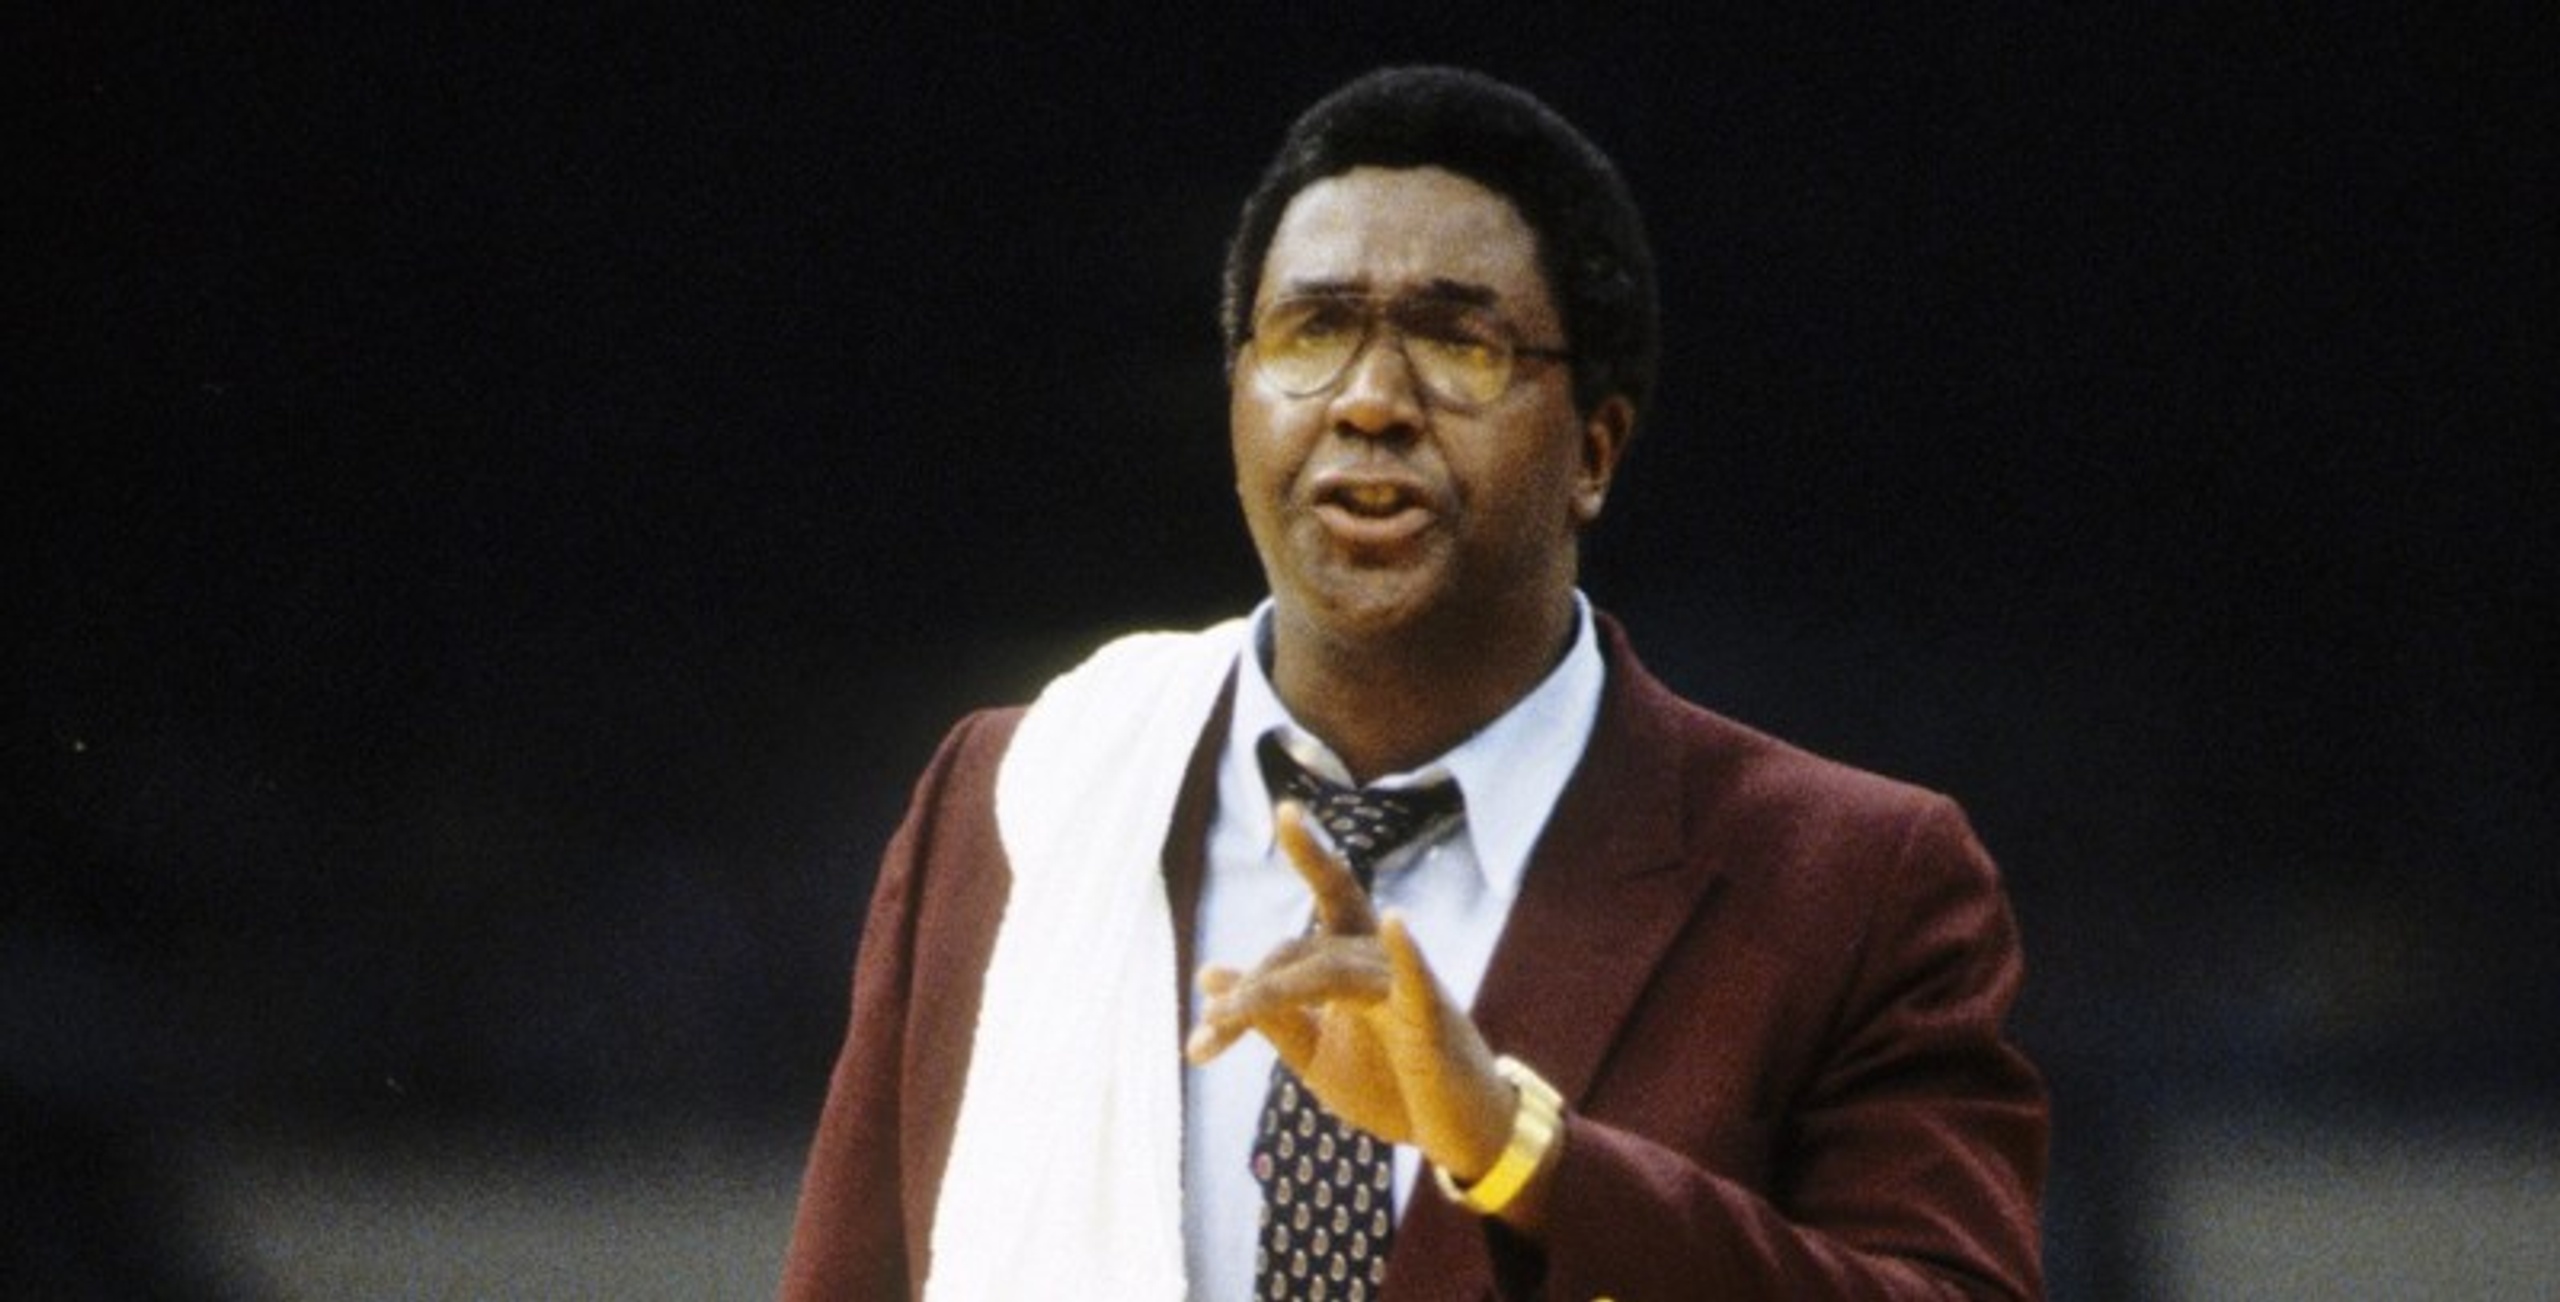 My special relationship with the late, great John Thompson